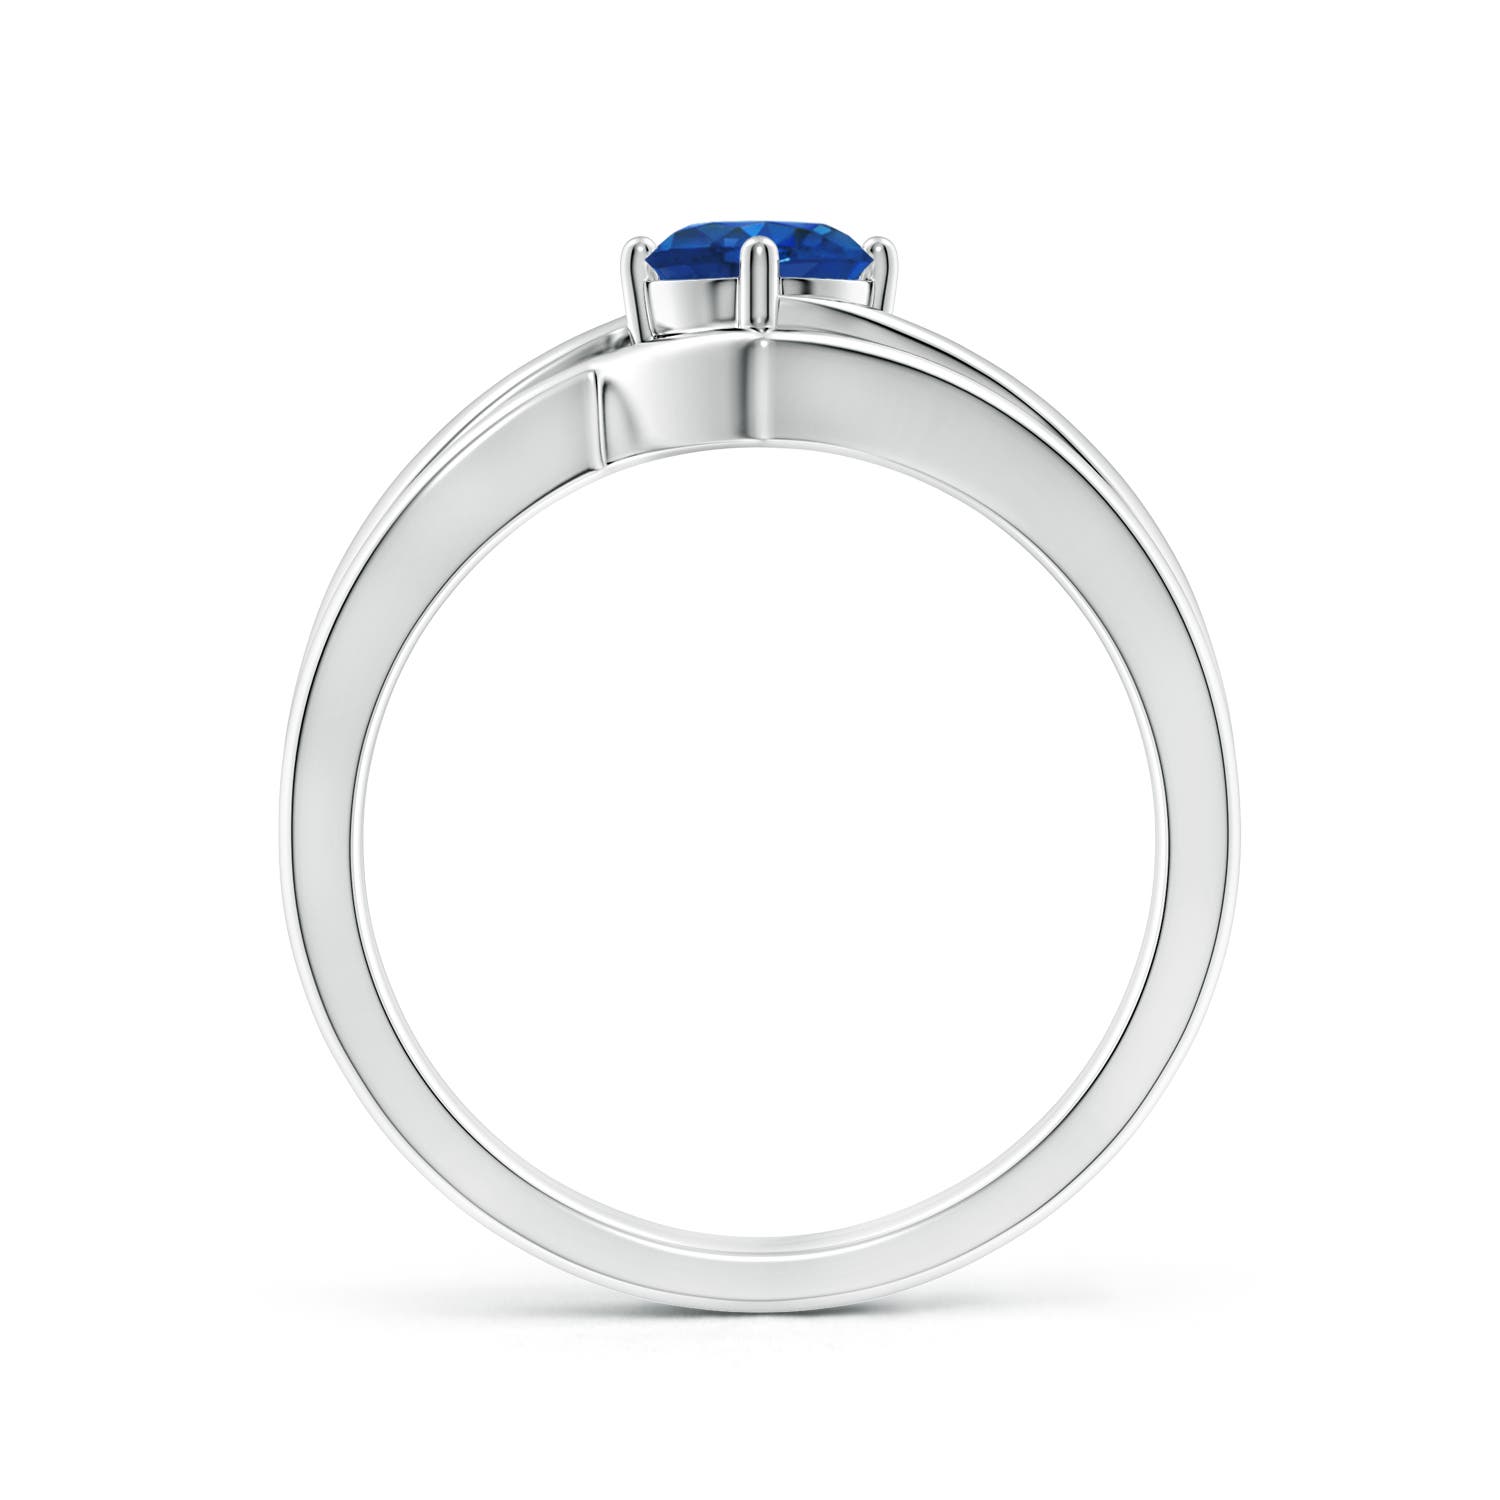 AAA - Blue Sapphire / 0.6 CT / 14 KT White Gold